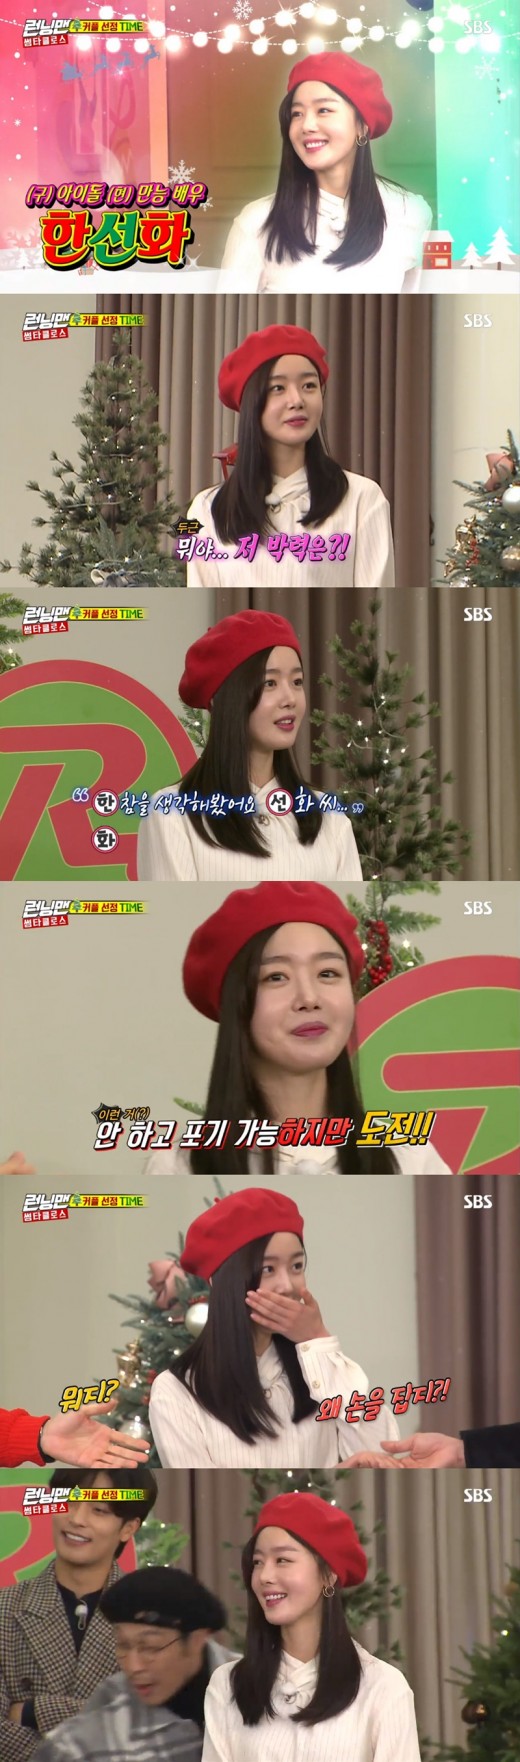 Actor Han Sun-hwa showed a unique presence in his long-time entertainment appearance.On the SBS entertainment program Running Man, which aired on the 23rd, a special feature of the Christmas celebration Thumbtan Close was featured, while Han Sun-hwa appeared as a guest.Han Sun-hwa has started to pair up as the couple chase continues.Among them, Lee Kwang-soo became a couple, but eventually he gave Park Ha-na a pair again and was confused from his first appearance.Han Sun-hwa is a guest, but he has a charm-blowing time as a guest, choosing Lee Kwang-soo as a partner Park Ha-na wants to join.It was a sudden situation, but I challenged the name Lee Kwang-soo to catch Lee Kwang-soos heart.Han Sun-hwa, who had been confident in the three-way poem, was laughed at the last letter and laughed at MC Yoo Jae-suk.Therefore, Han Sun-hwa, who became a soloist, started to make a pair again, and showed a unique fun sense by showing his ability to ask a new partner for his Sam-Hang poem by choosing Yoo Jae-Suk among the remaining partners.Han Sun-hwa, who has left an intense impact since the beginning of his performance in the entertainment industry for a long time, is expected to show his performance in the couple race next week.Meanwhile, Han Sun-hwa will visit the CRT with TVN single-act drama Drama Stage 2019 - Good - My Life Insurance, which will be broadcast at 12 pm on the 29th.